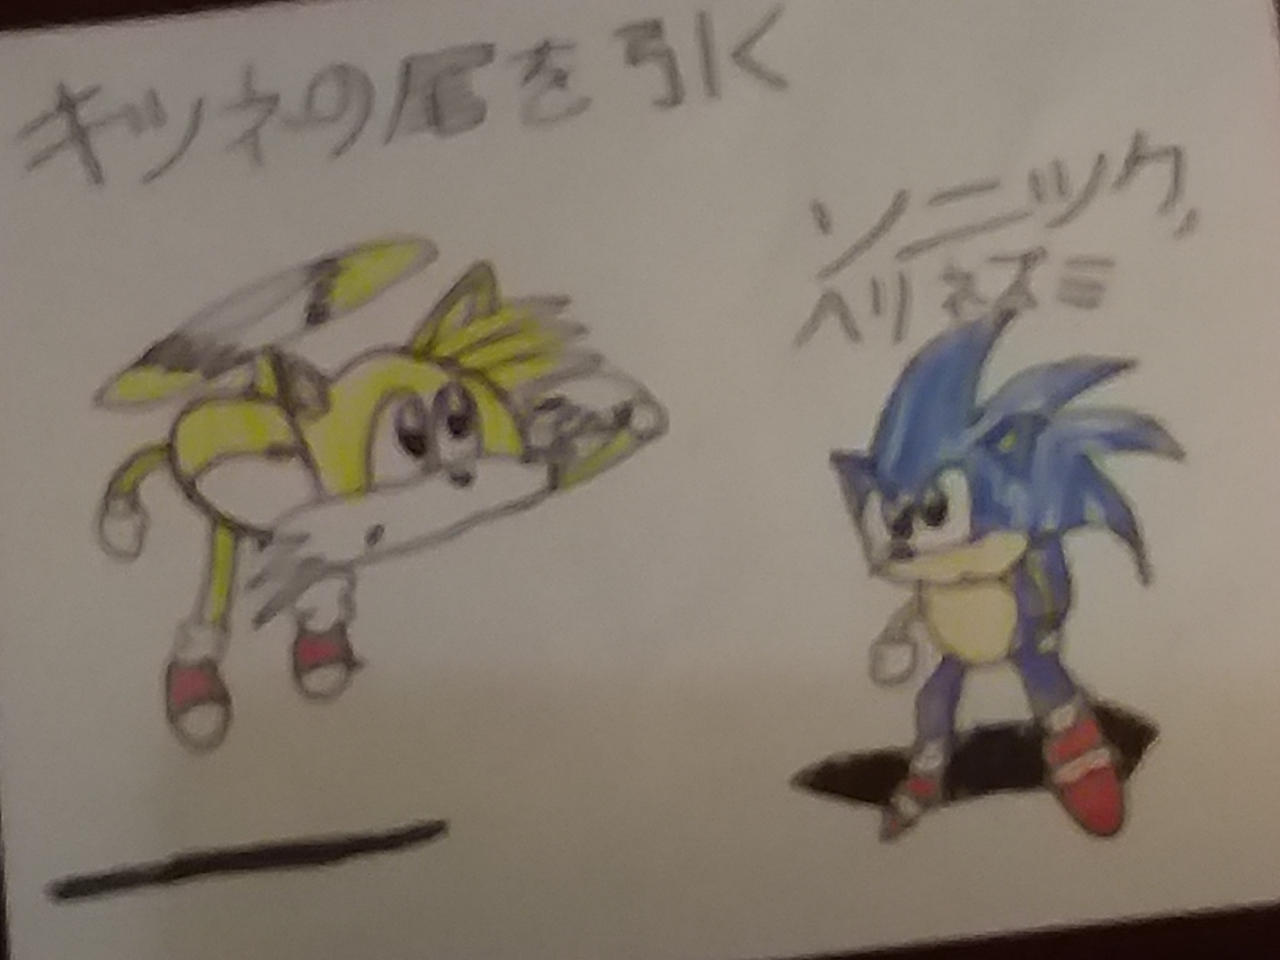 sonic the hedgehog and tails (sonic) drawn by misuta710